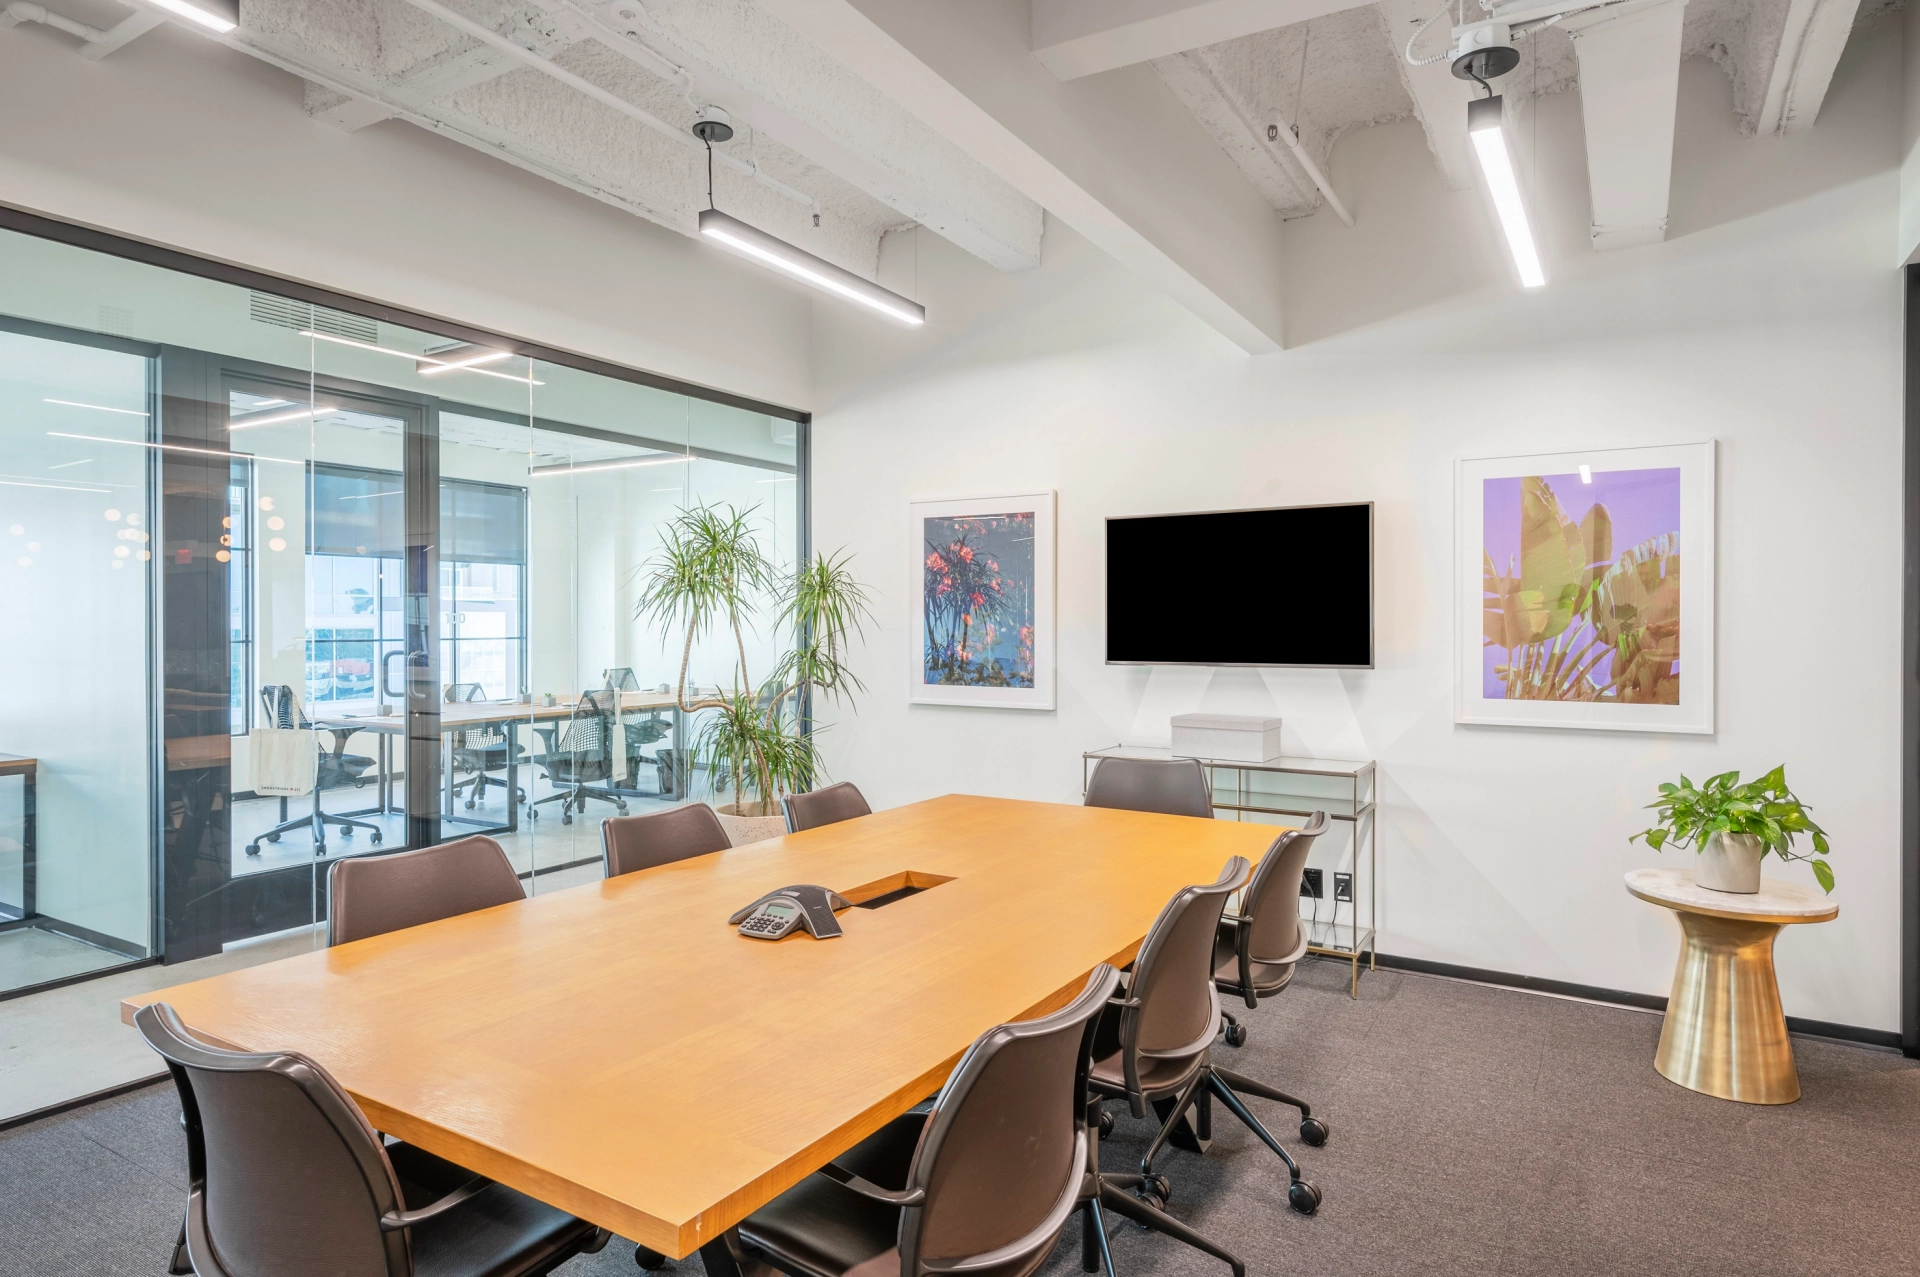 An office meeting room in Atlanta equipped with a large table and chairs.